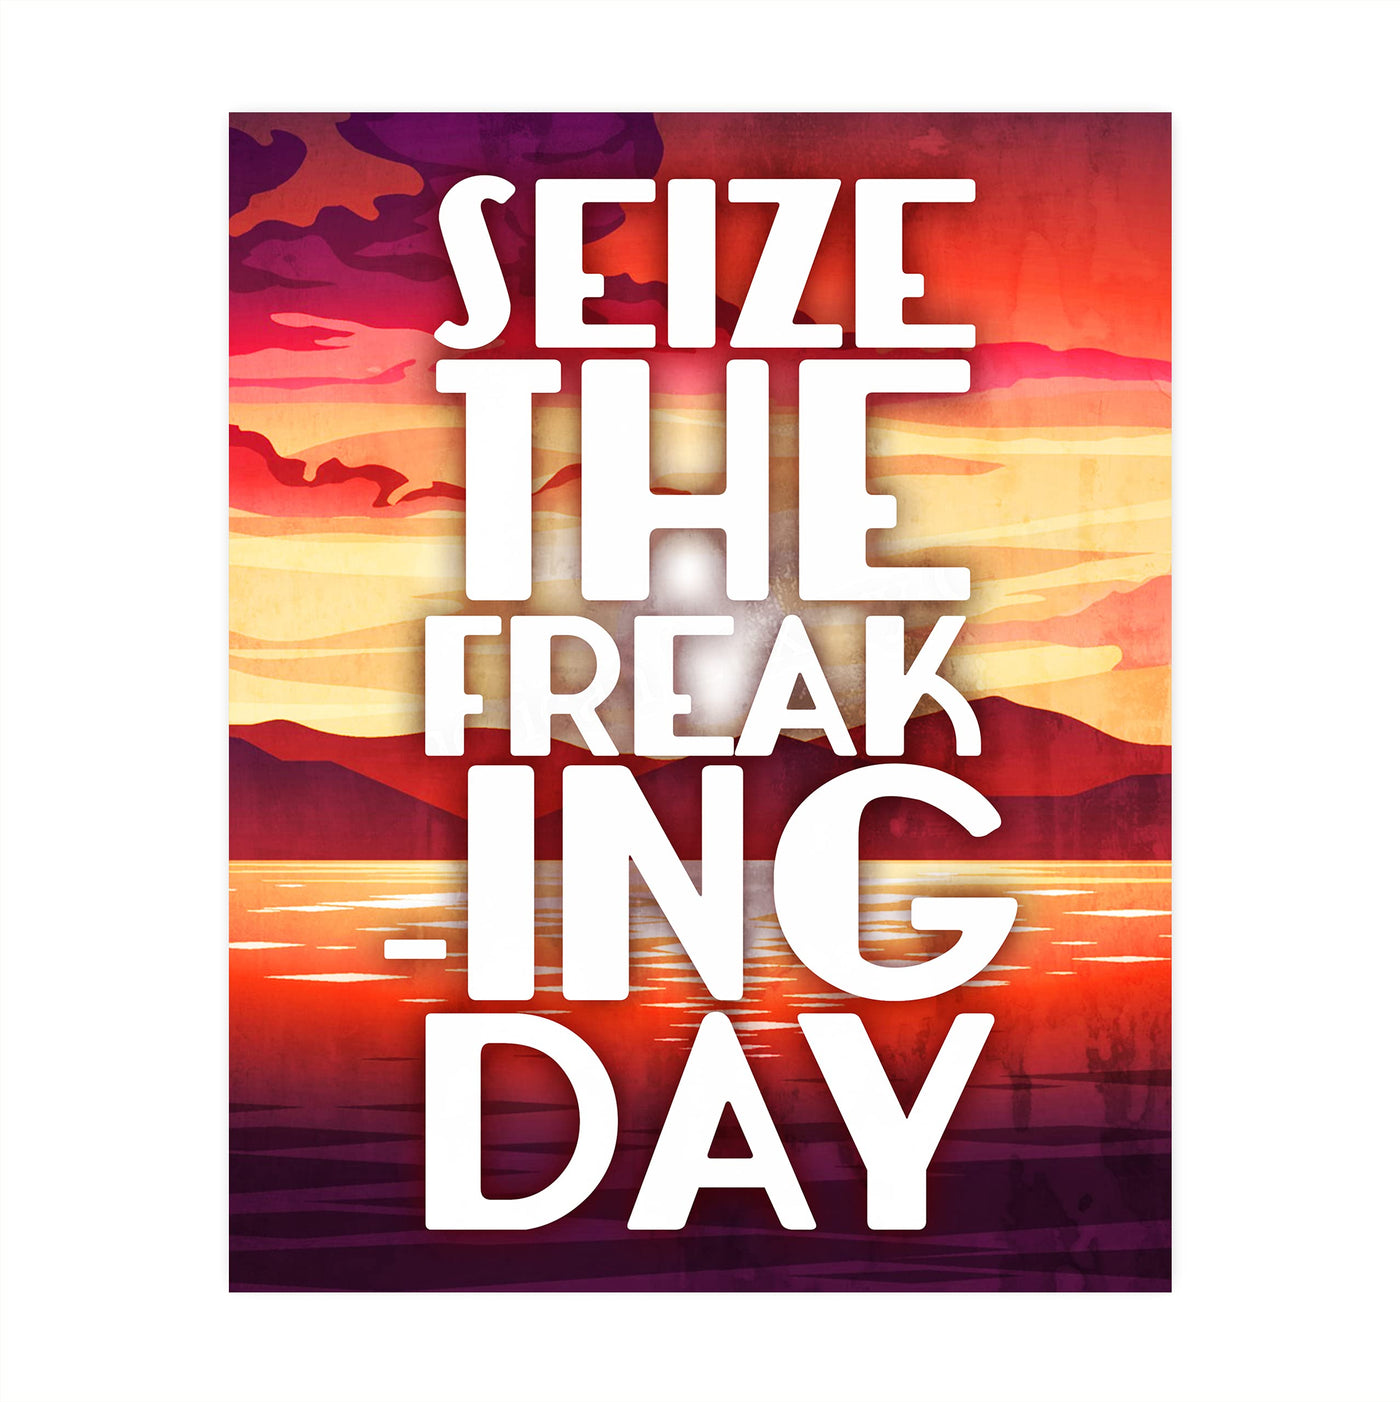 Seize the Freaking Day Funny Motivational Wall Art Sign -8 x 10" Humorous Sunset Print-Ready to Frame. Home-Office-Desk-Bar-Shop-Cave Decor. Fun Gift-Sign to Encourage Success. Carpe Diem!